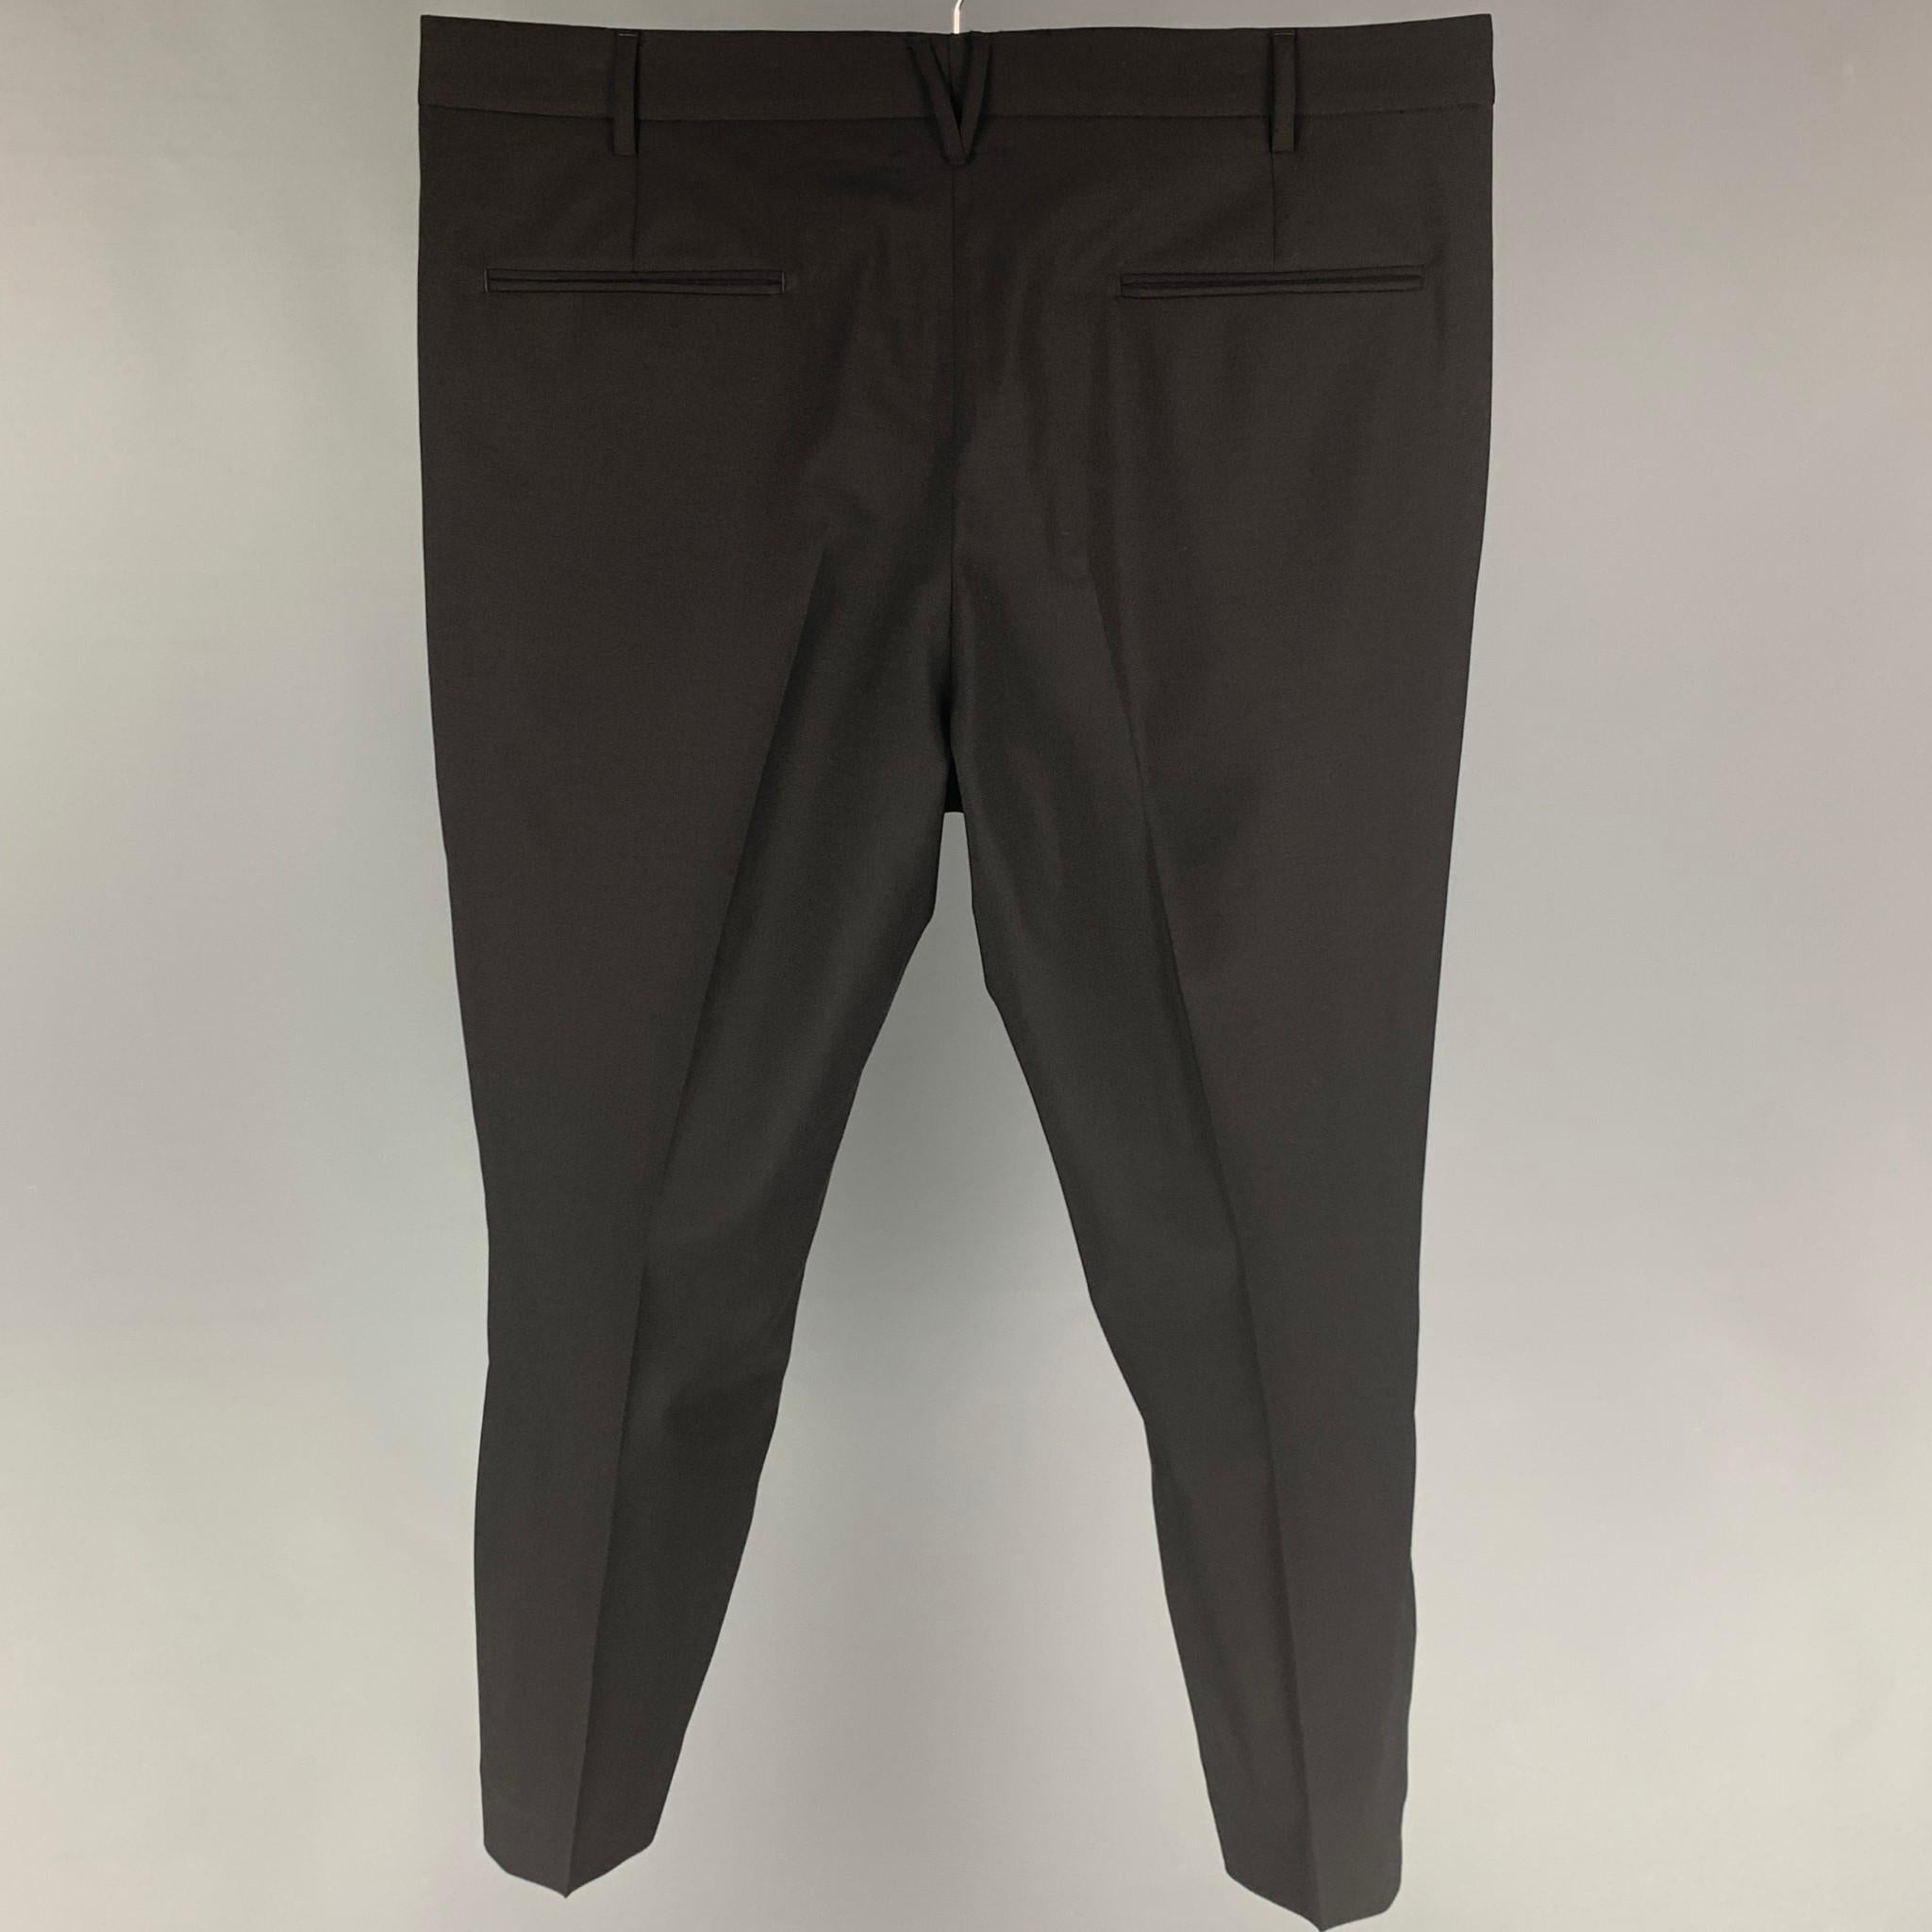 VALENTINO dress pants comes in a black wool / mohair featuring a flat front, front tab, and a zip fly closure. Made in Italy. 

Very Good Pre-Owned Condition.
Marked: 50

Measurements:

Waist: 36 in.
Rise: 11 in.
Inseam: 26 in.